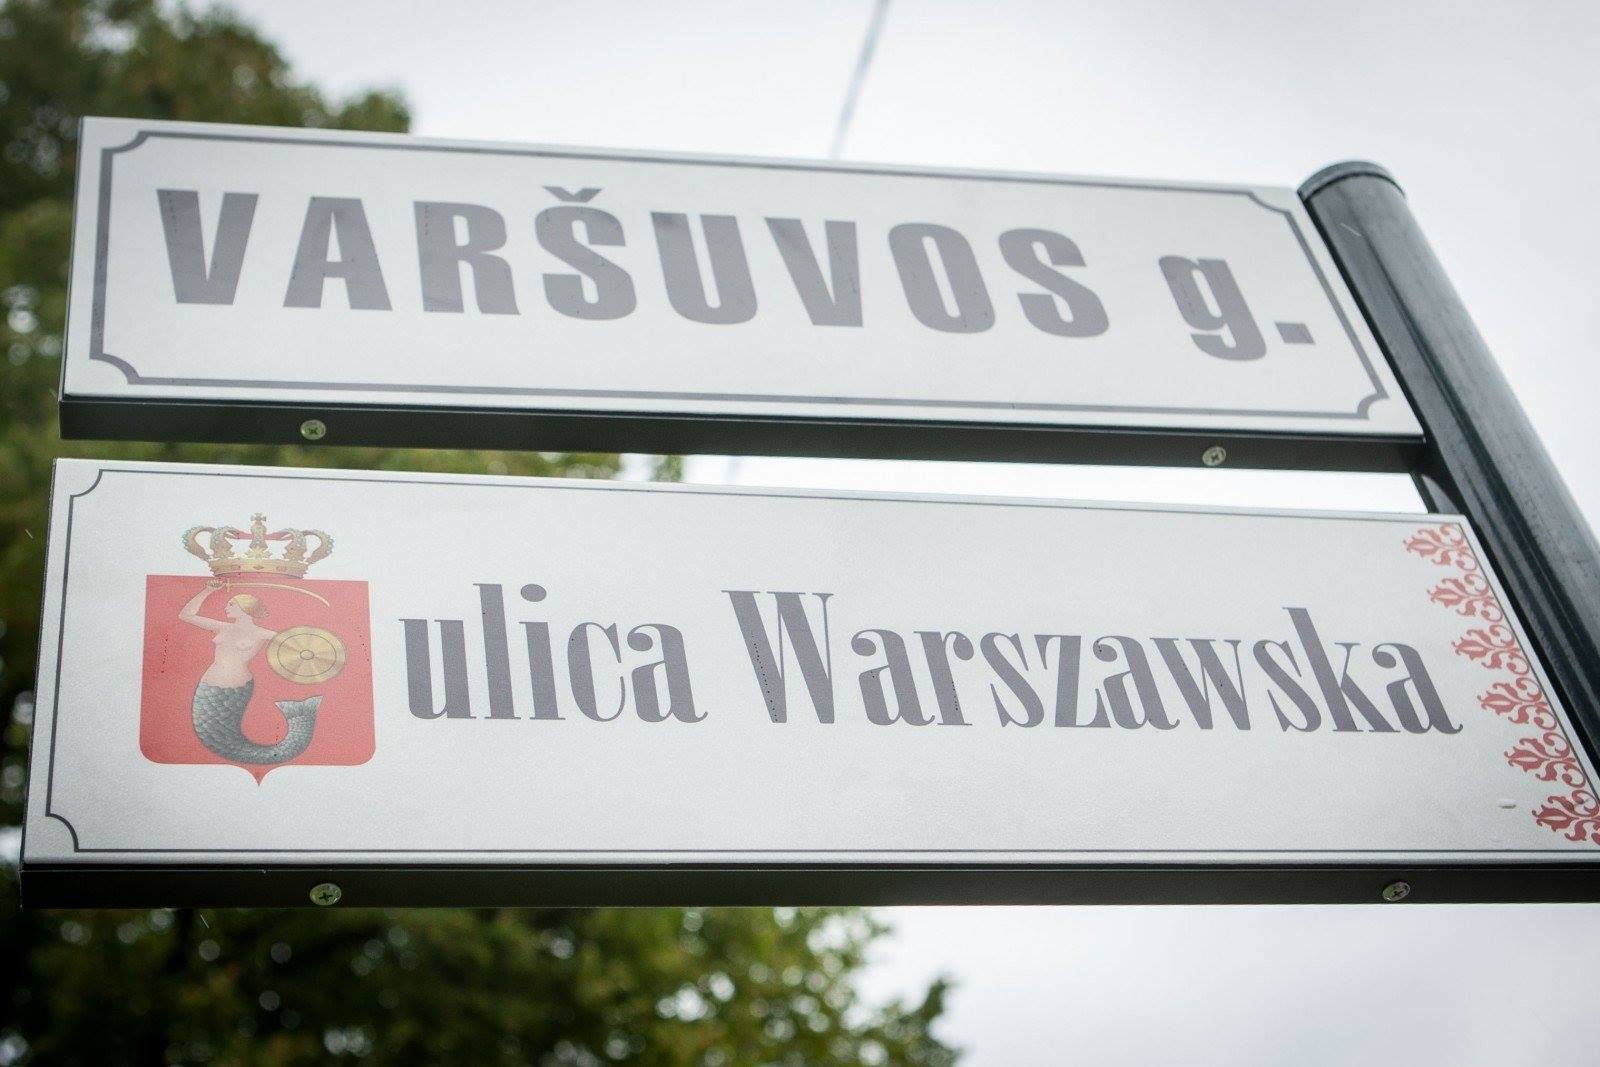 Court ruled – the bilingual street signs do not breach law. What’s next?